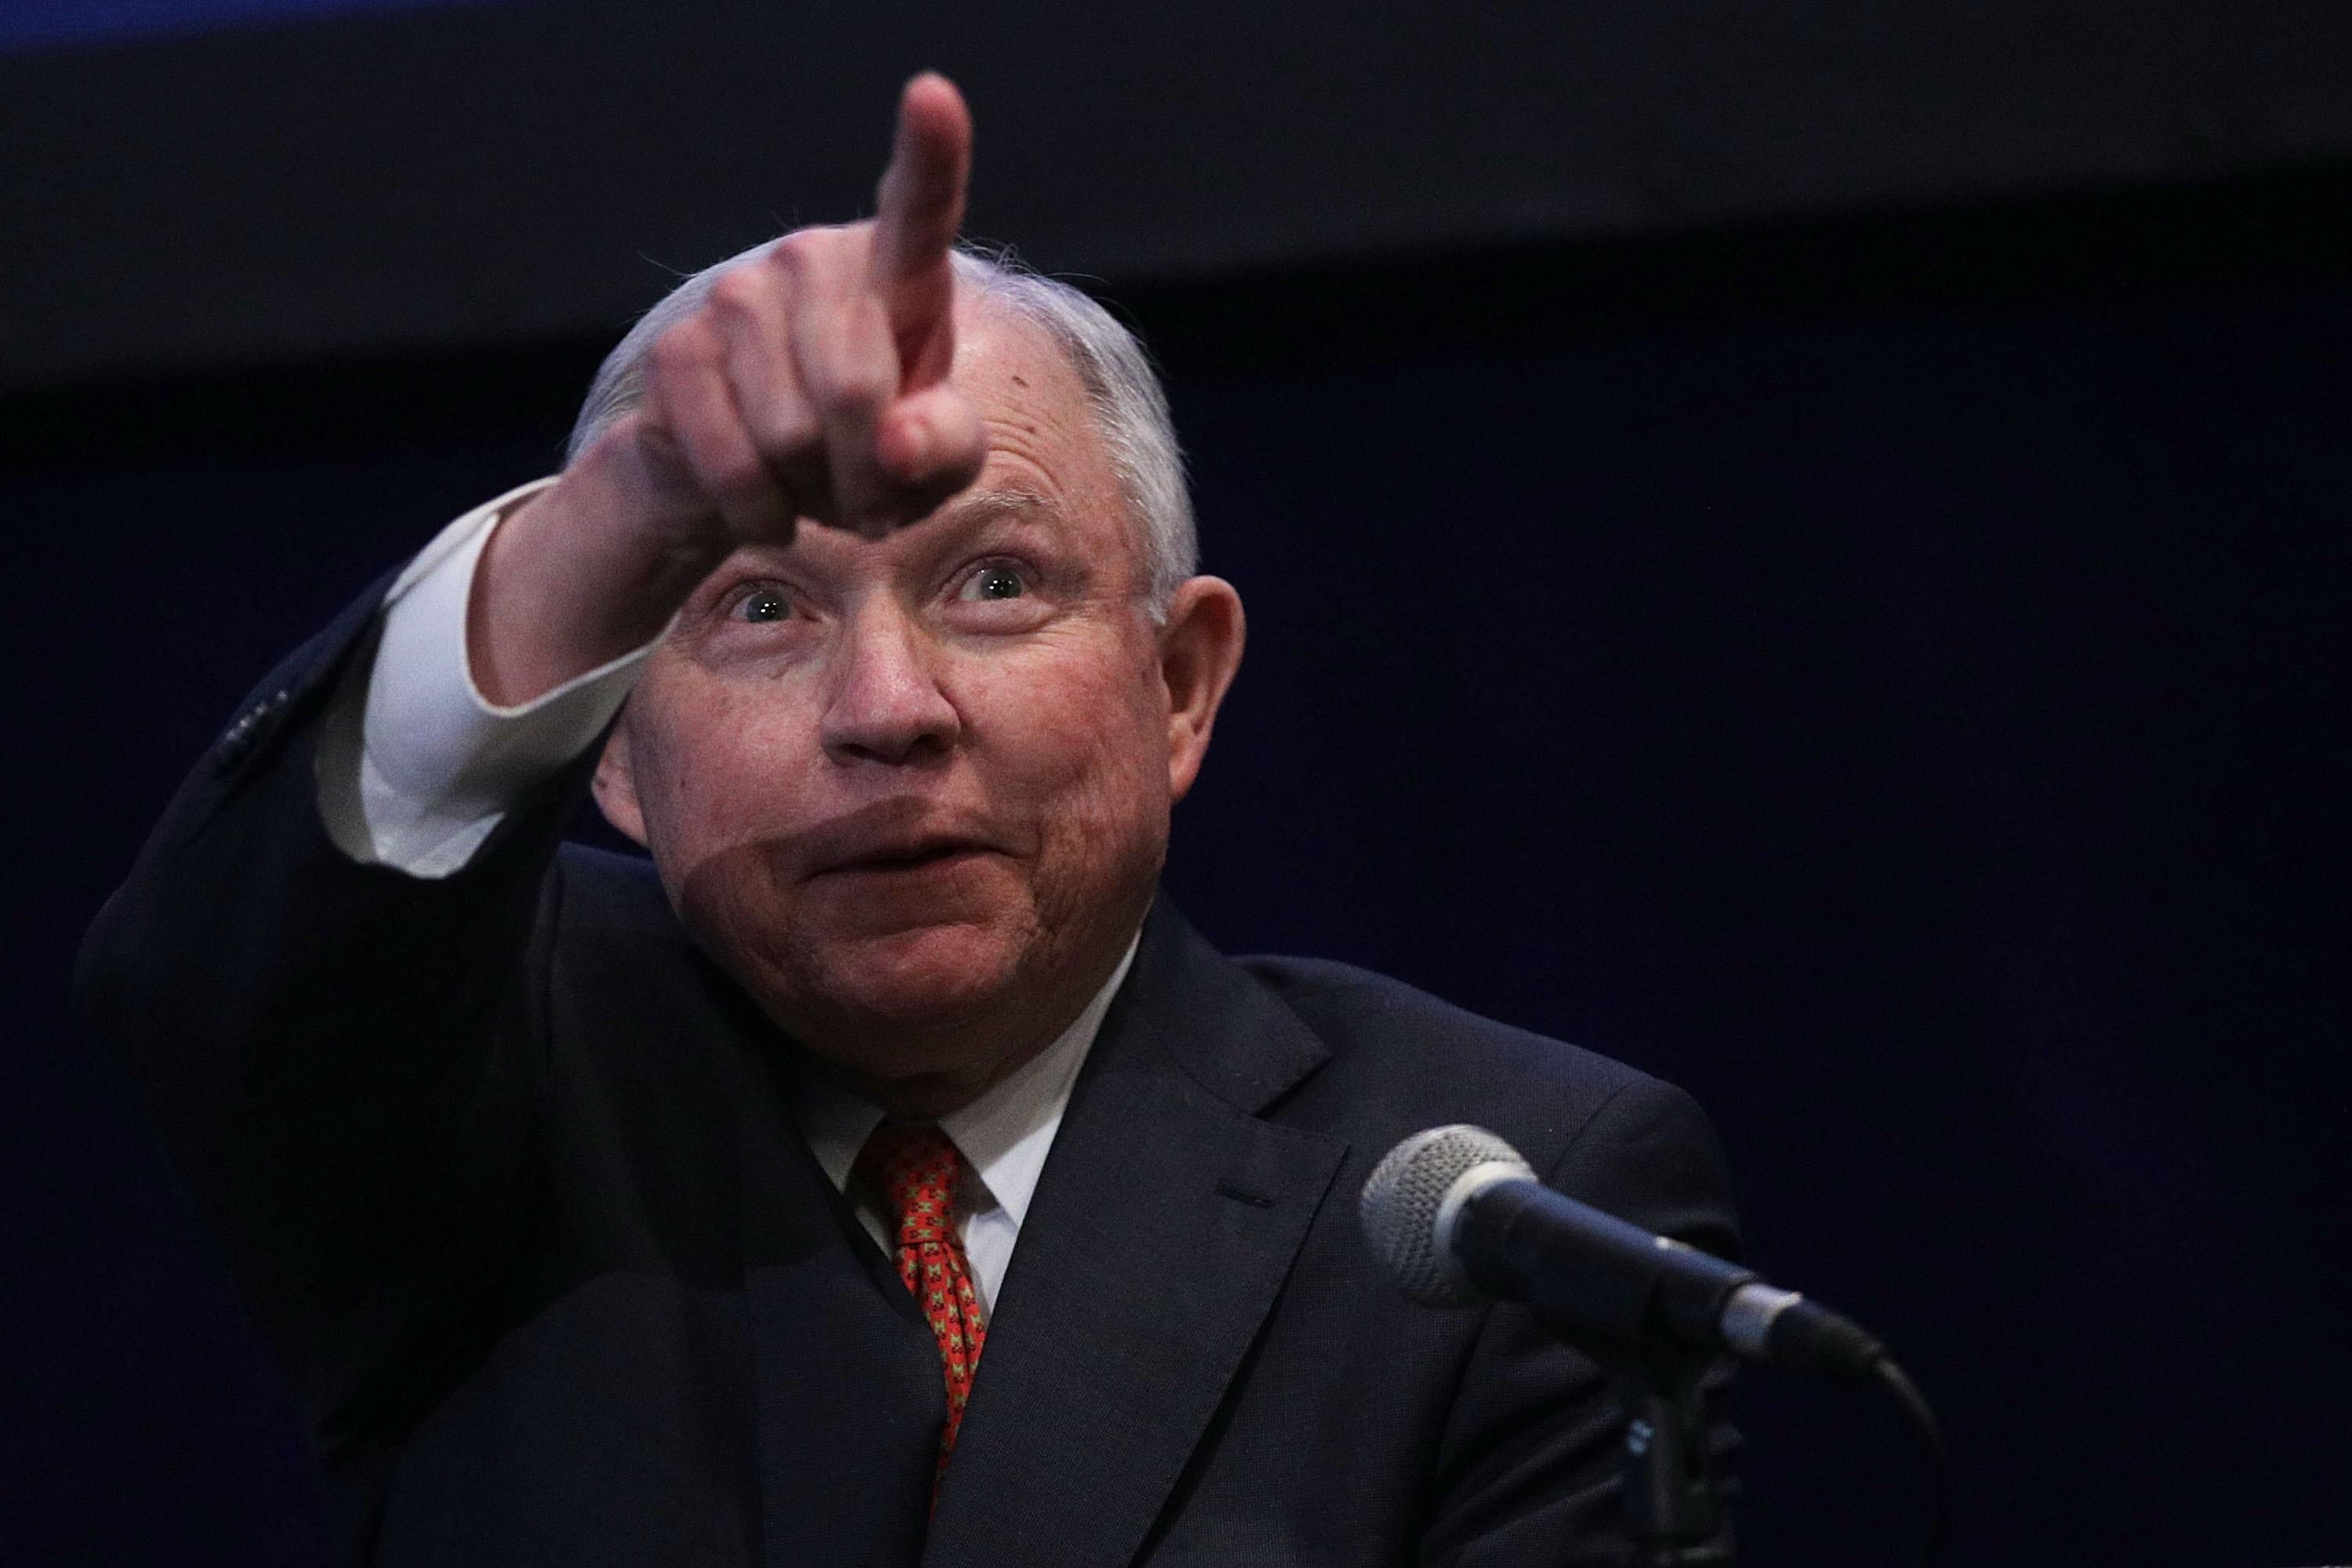 Attorney General Jeff Sessions points from behind a microphone during an event in Washington, DC. 